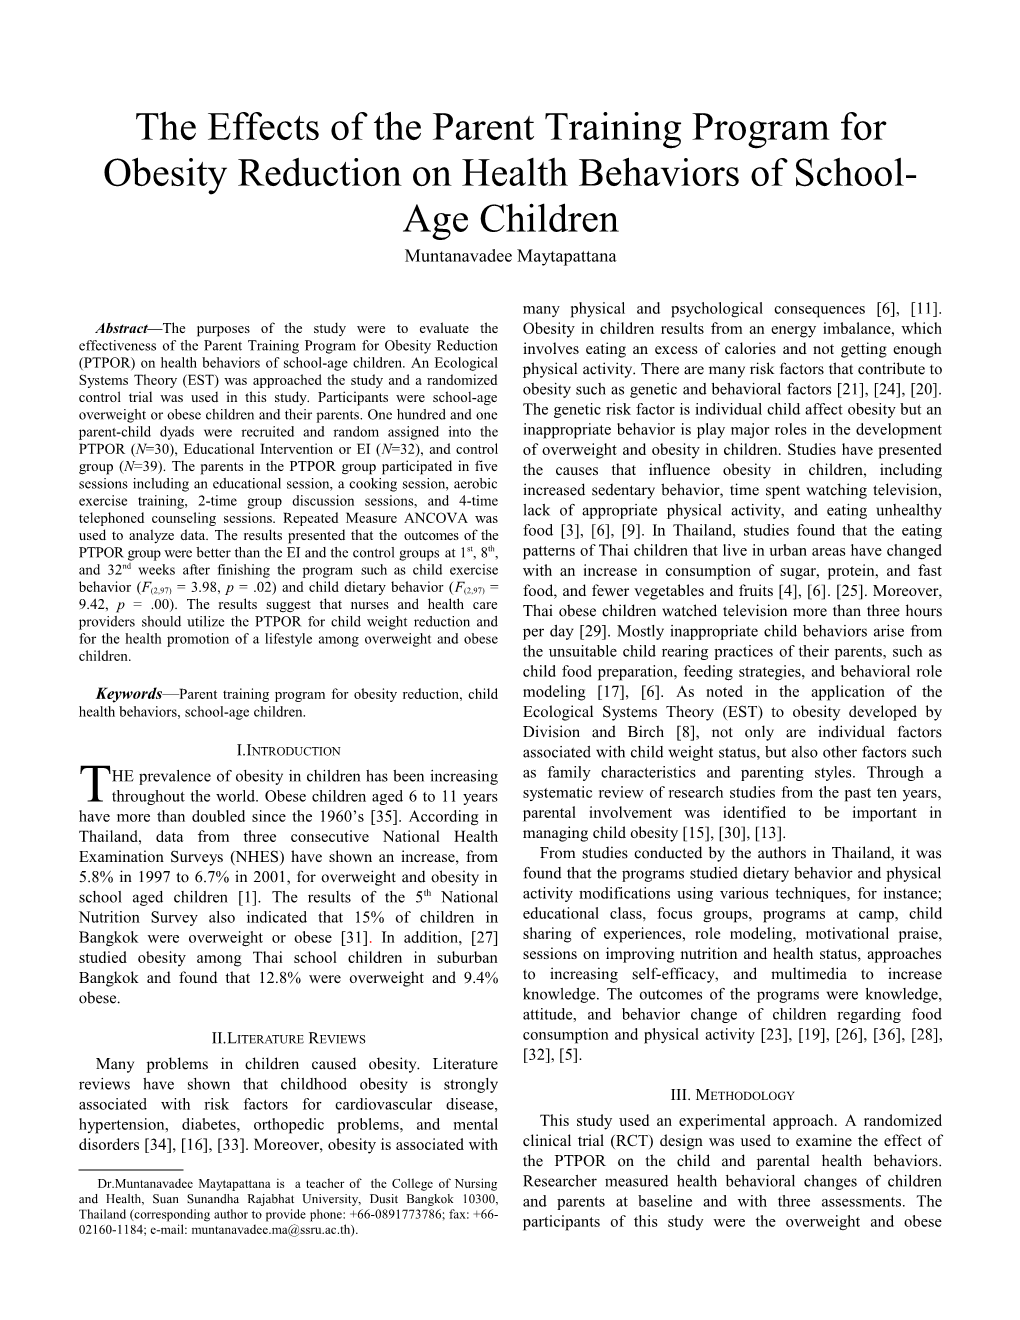 The Effects of the Parent Training Program for Obesity Reduction on Health Behaviors Of